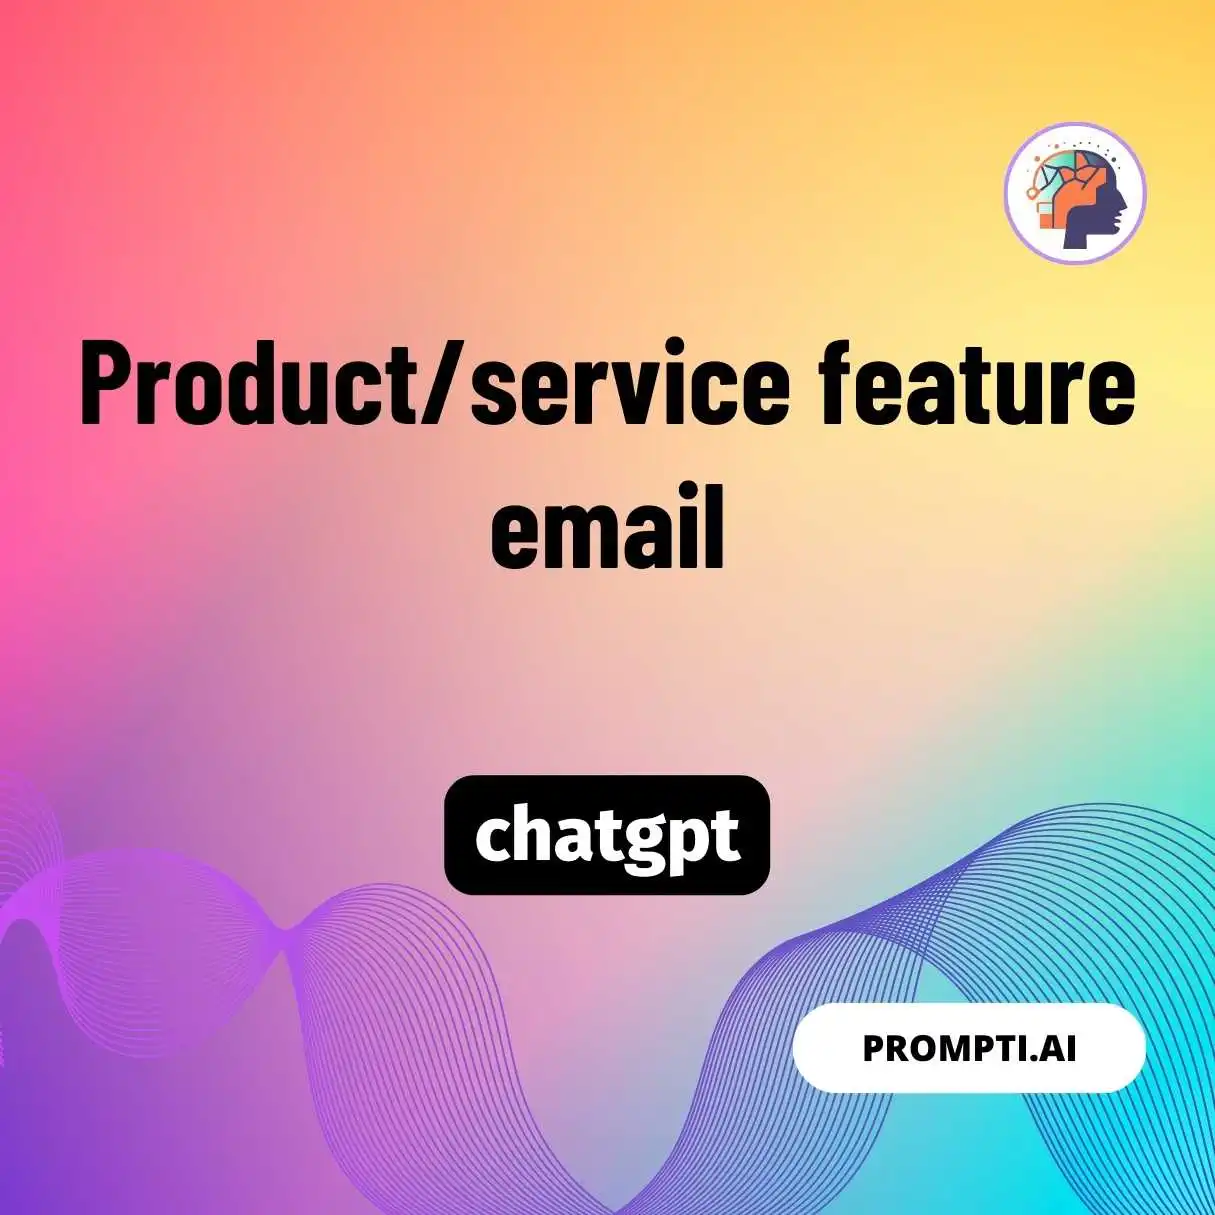 Product/service feature email